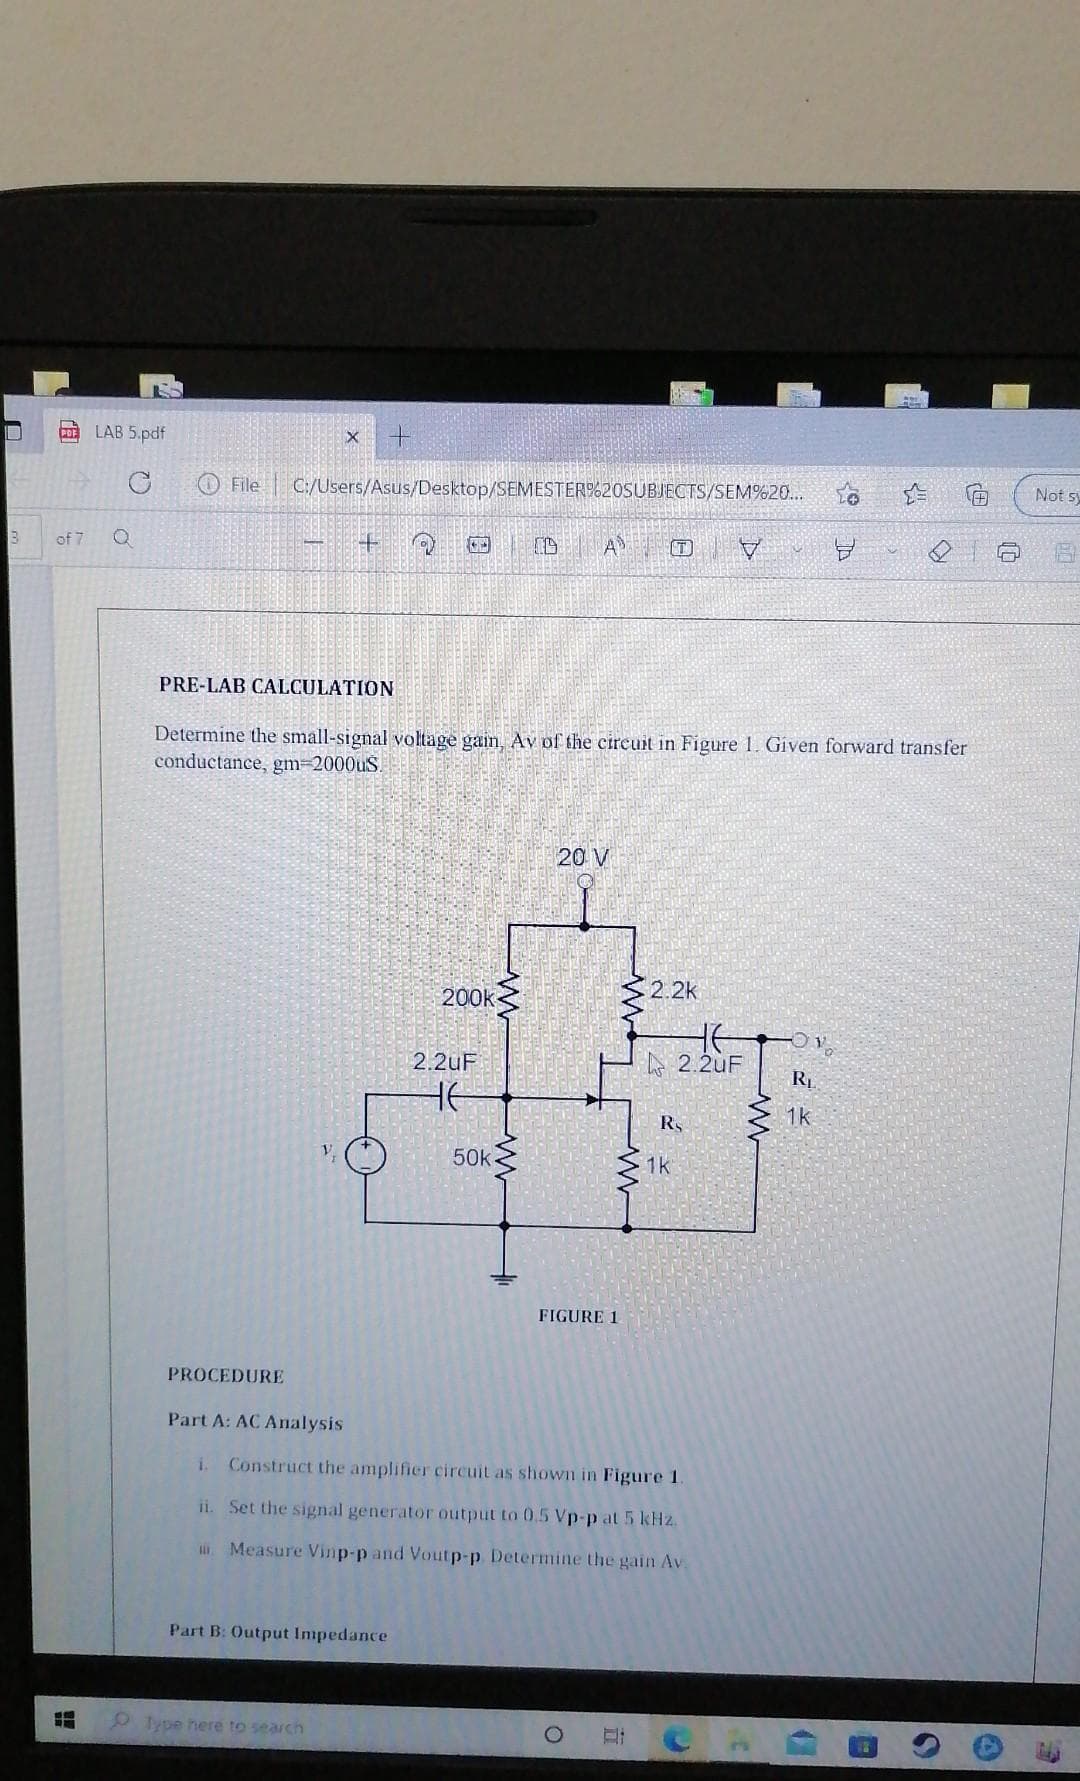 LAB 5.pdf
File
C:/Users/Asus/Desktop/SEMESTER%20SUBJECTS/SEM%20...
Not sy
of 7
A
PRE-LAB CALCULATION
Determine the small-signal voltage gain, Av of the cireuit in Figure 1. Given forward transfer
conductance, gm=2000uS.
20 V
200k
2.2k
2.2uF
A 2.2uF
RL
HE
1k
RS
50k
1k
FIGURE 1
PROCEDURE
Part A: AC Analysis
i.
Construct the amplifier circuit as shown in Figure 1.
ii. Set the signal generator output to 0.5 Vp-p at 5 kHz.
. Measure Vinp-p and Voutp-p Determine the gain Av.
Part B: Output Impedance
O lype here to search
